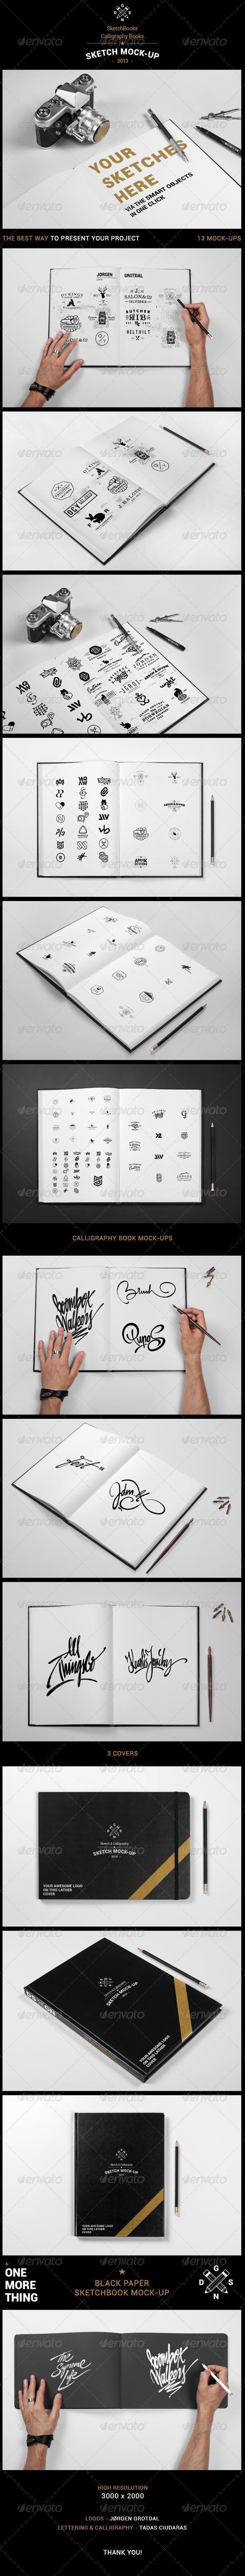 Sketch book and calligraphy book mock up